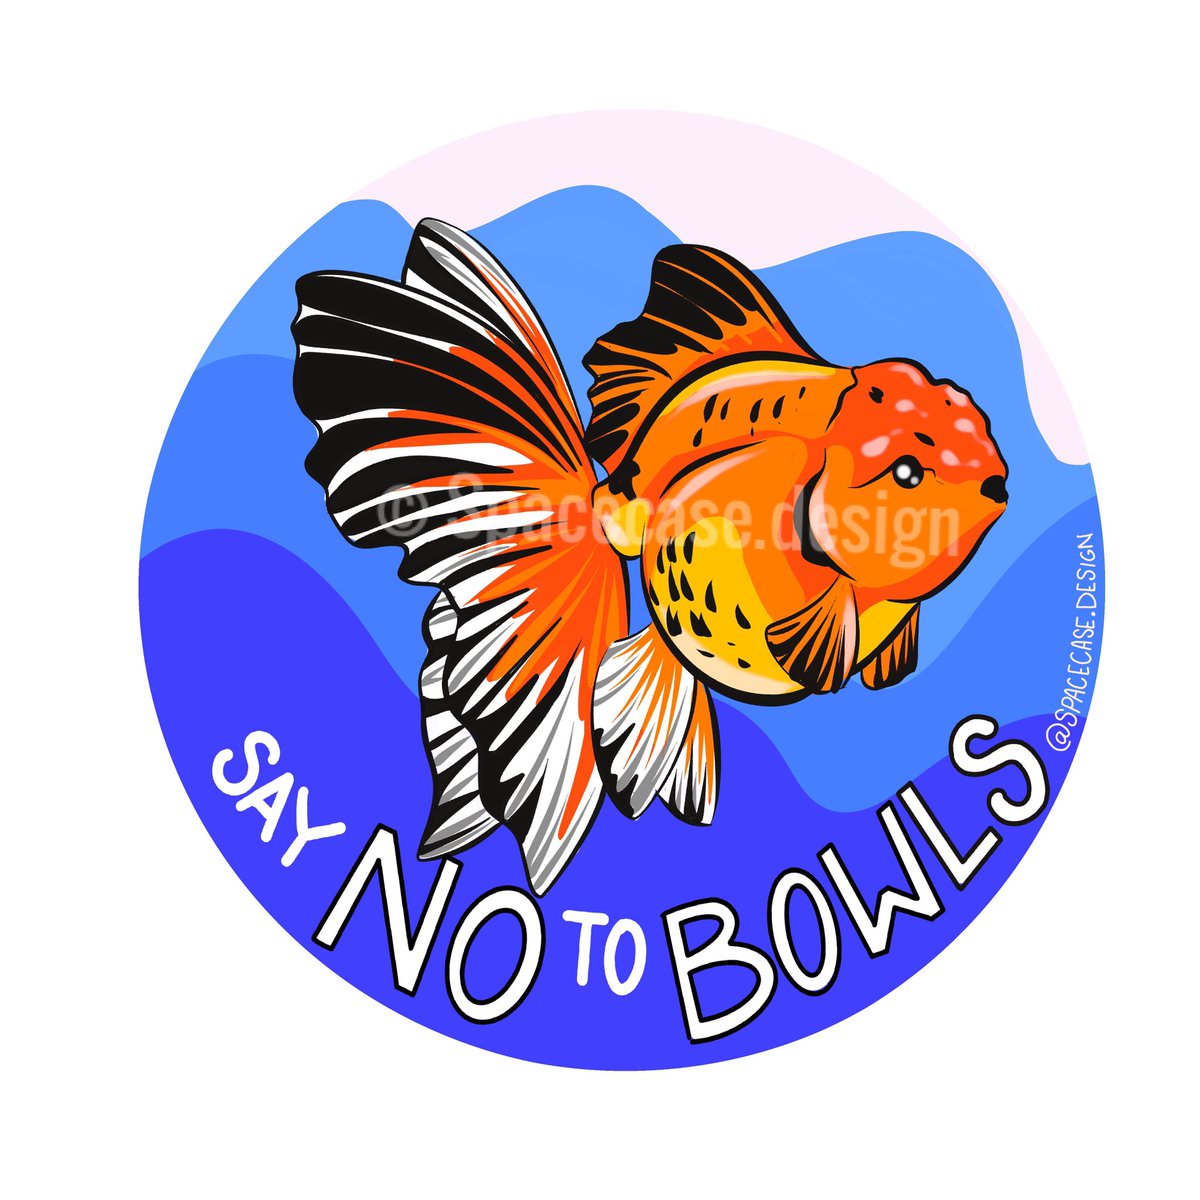 New sticker design I'm so excited to make these! 
What do u think? 
Im really into pets and keeping fish but alot if people are uneducated as to what's a proper environment for fish especially goldfish and Bettas